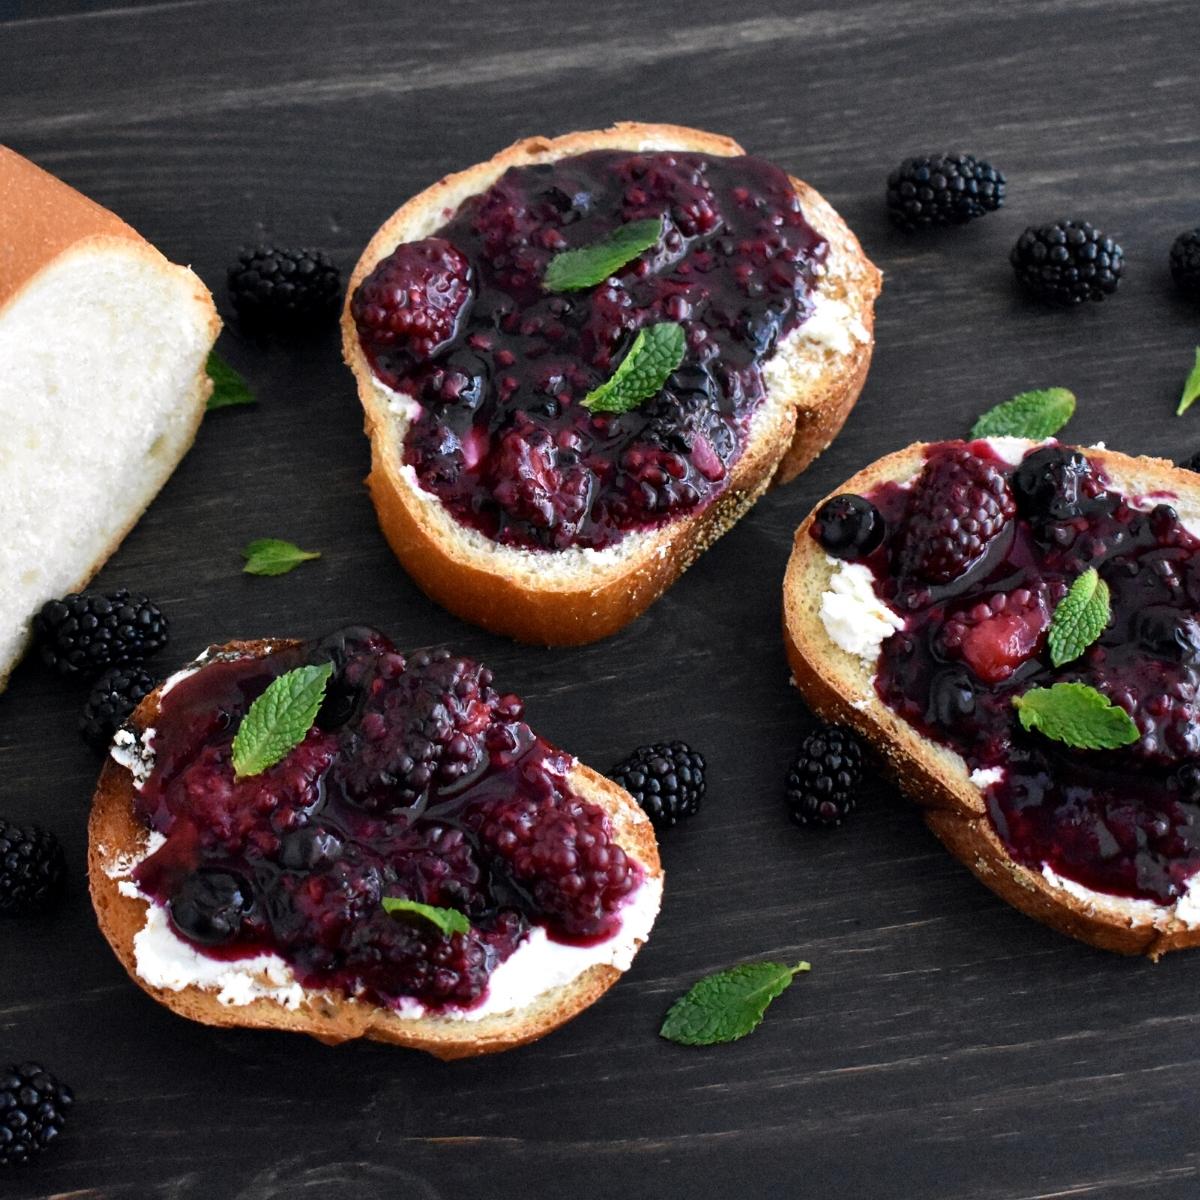 3 slices of goat crostini topped with white goat cheese and pickled blackberries. Garnished with green herbs on top.